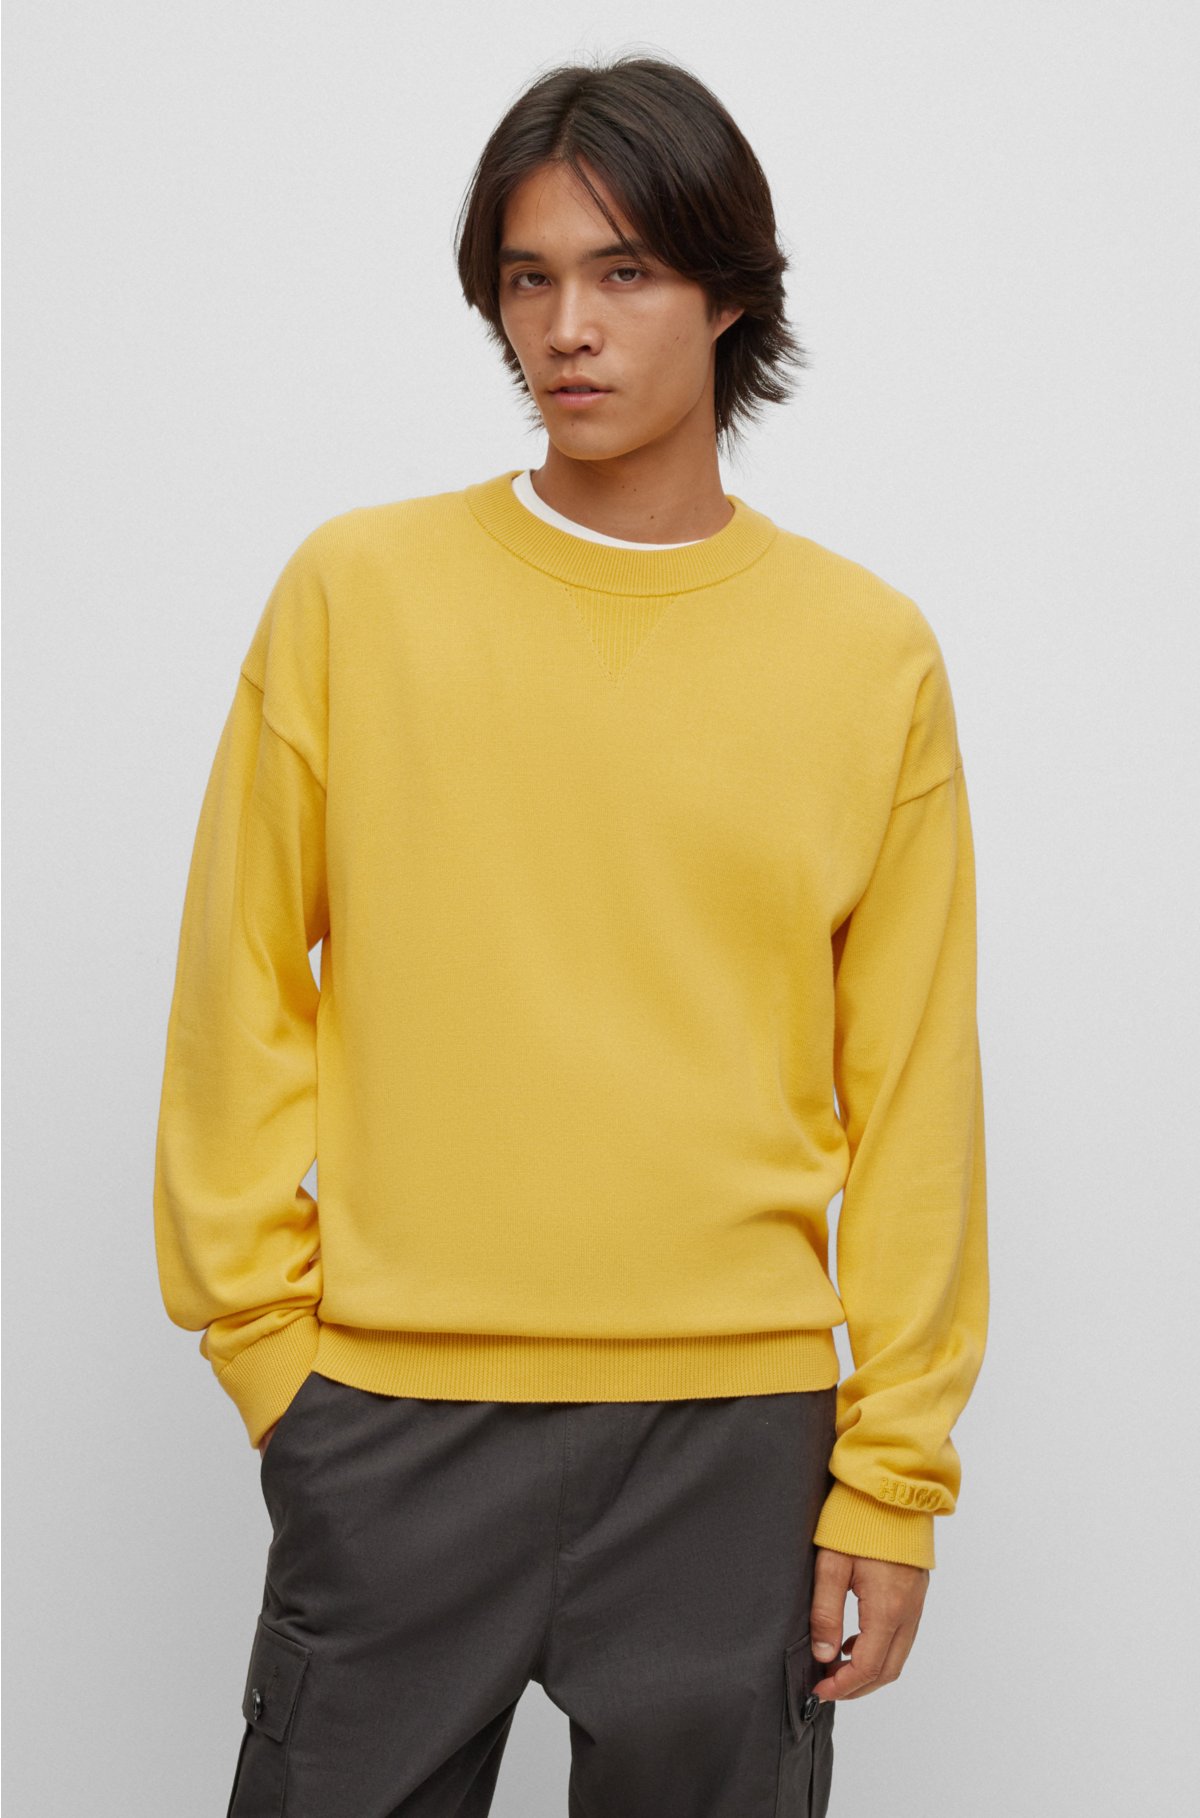 HUGO - sweater with embroidered logo